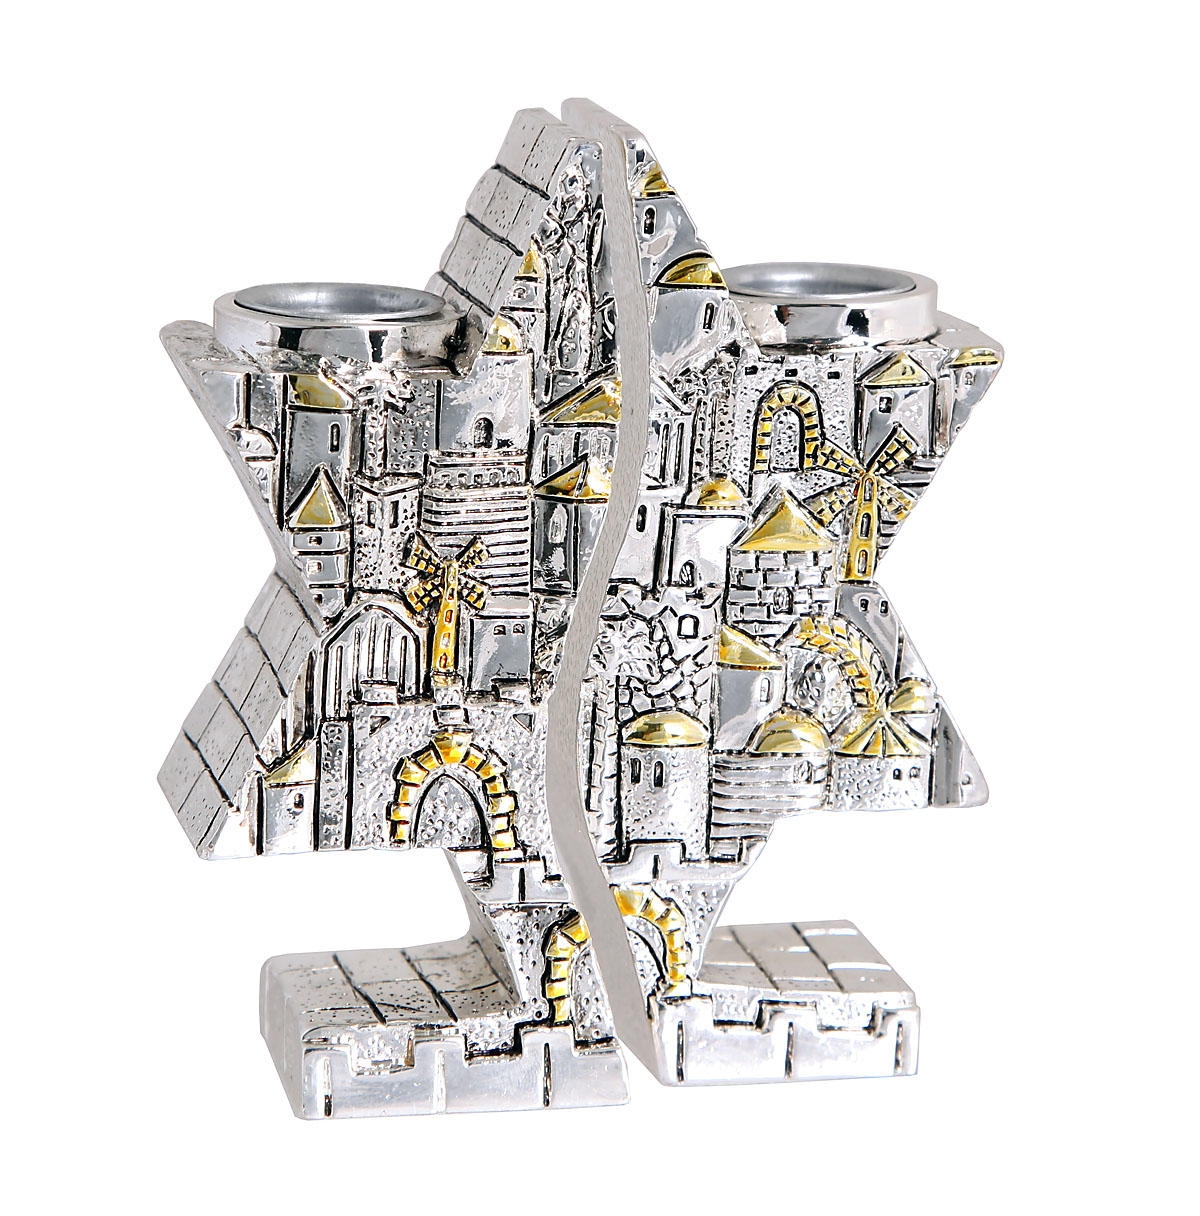  Silver Star of David Fitted Candlesticks - 1